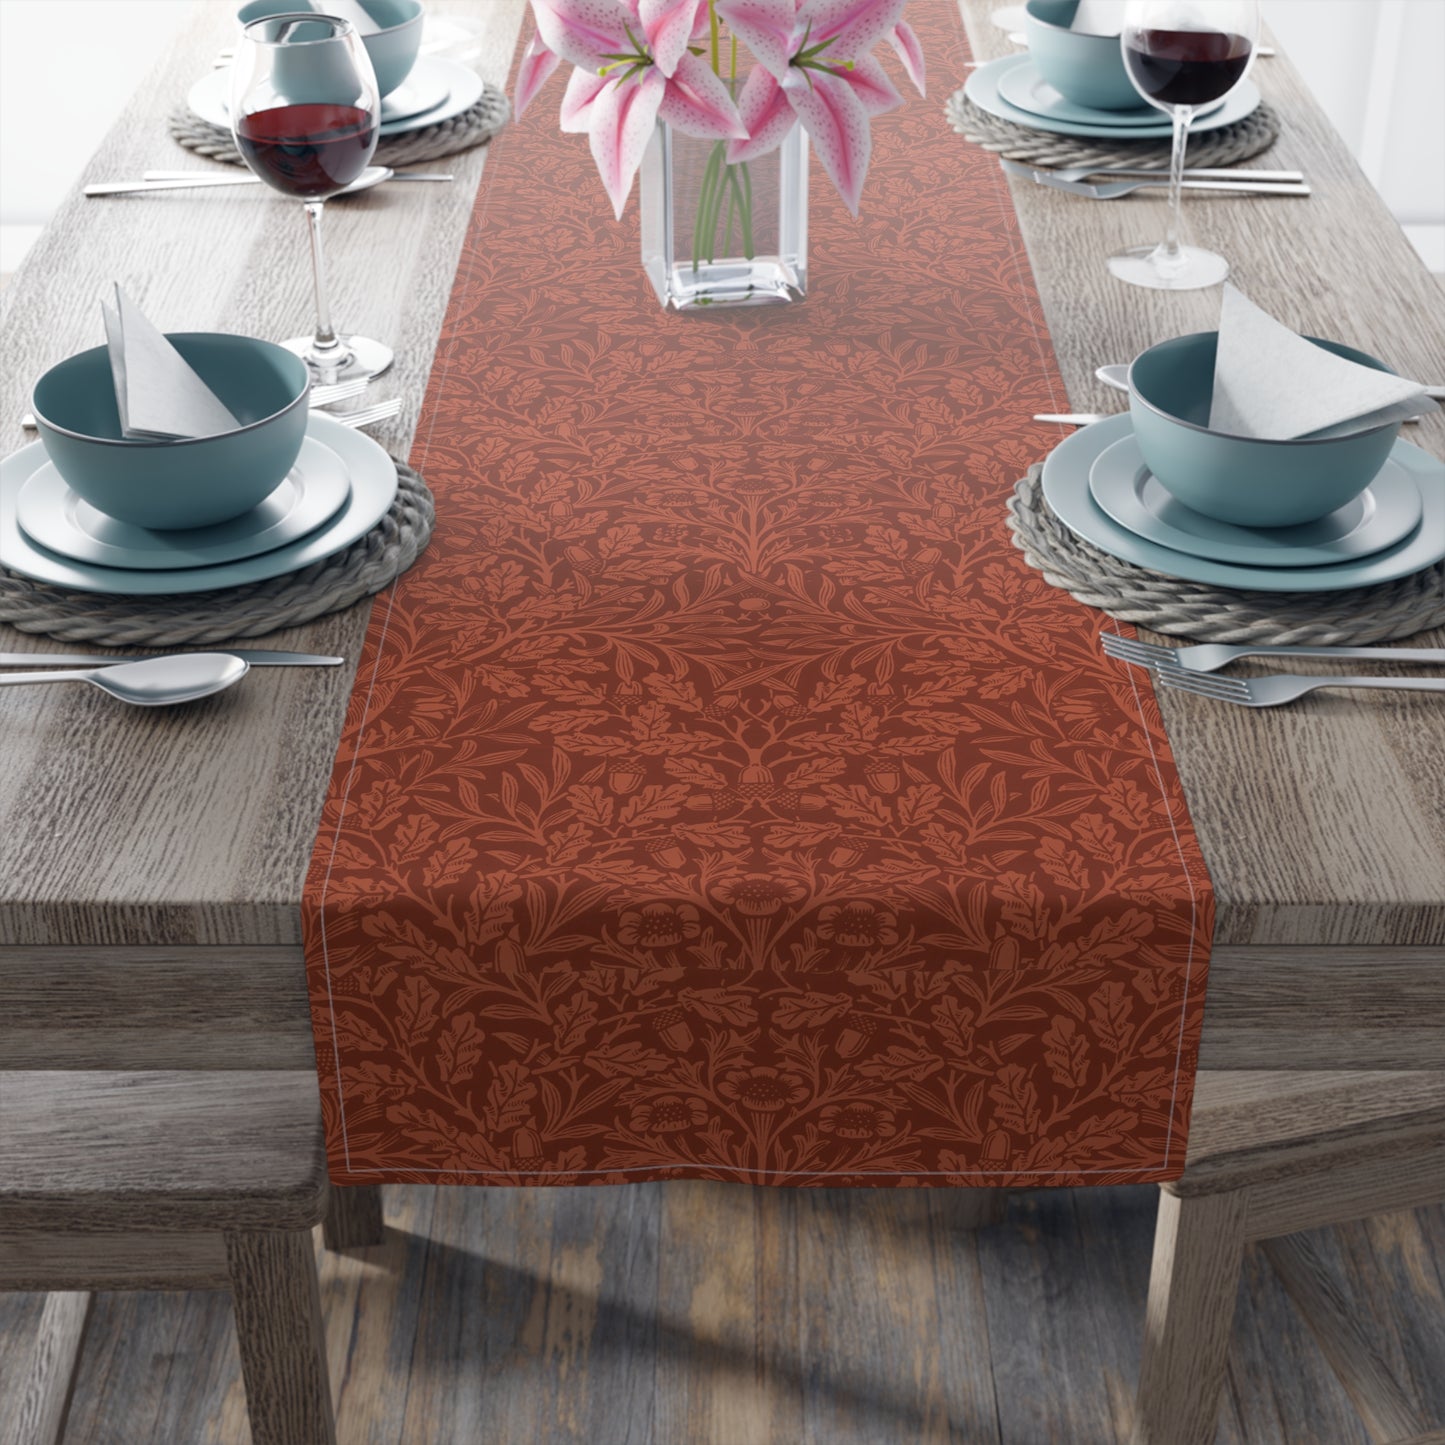 william-morris-co-table-runner-acorns-and-oak-leaves-collection-rust-2